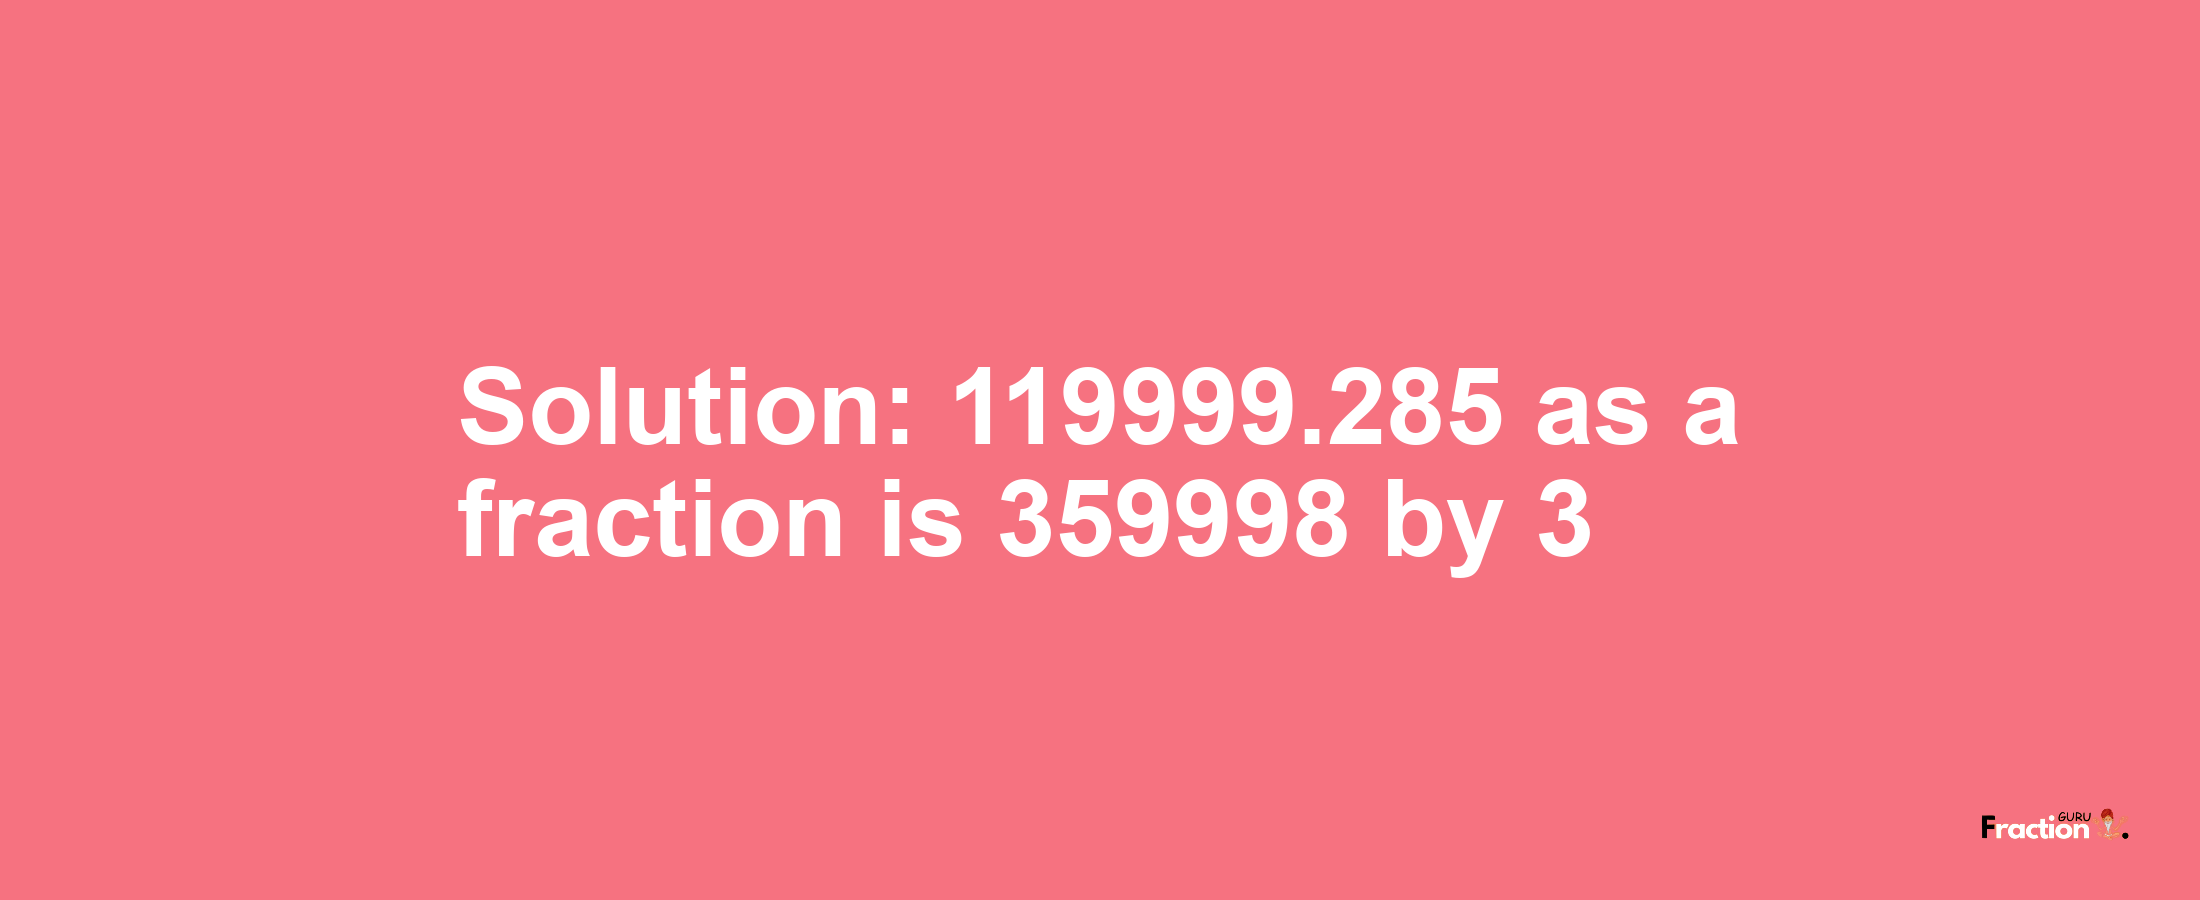 Solution:119999.285 as a fraction is 359998/3